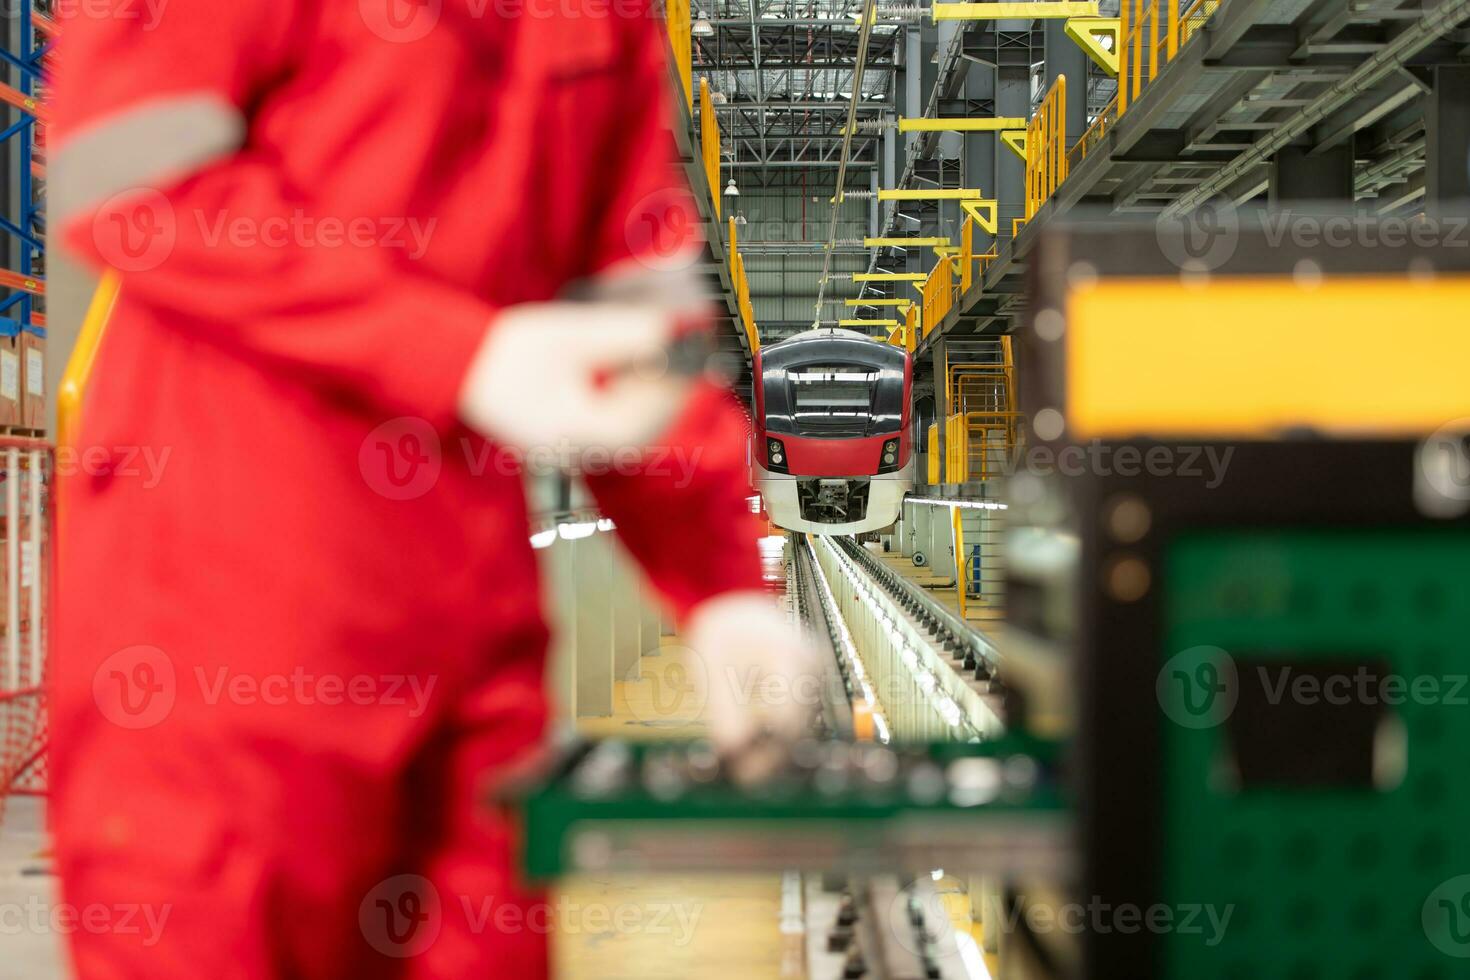 Picture of engineer using repair tools of the electric train industry There is an electric train in the train repair factory as the background image. photo